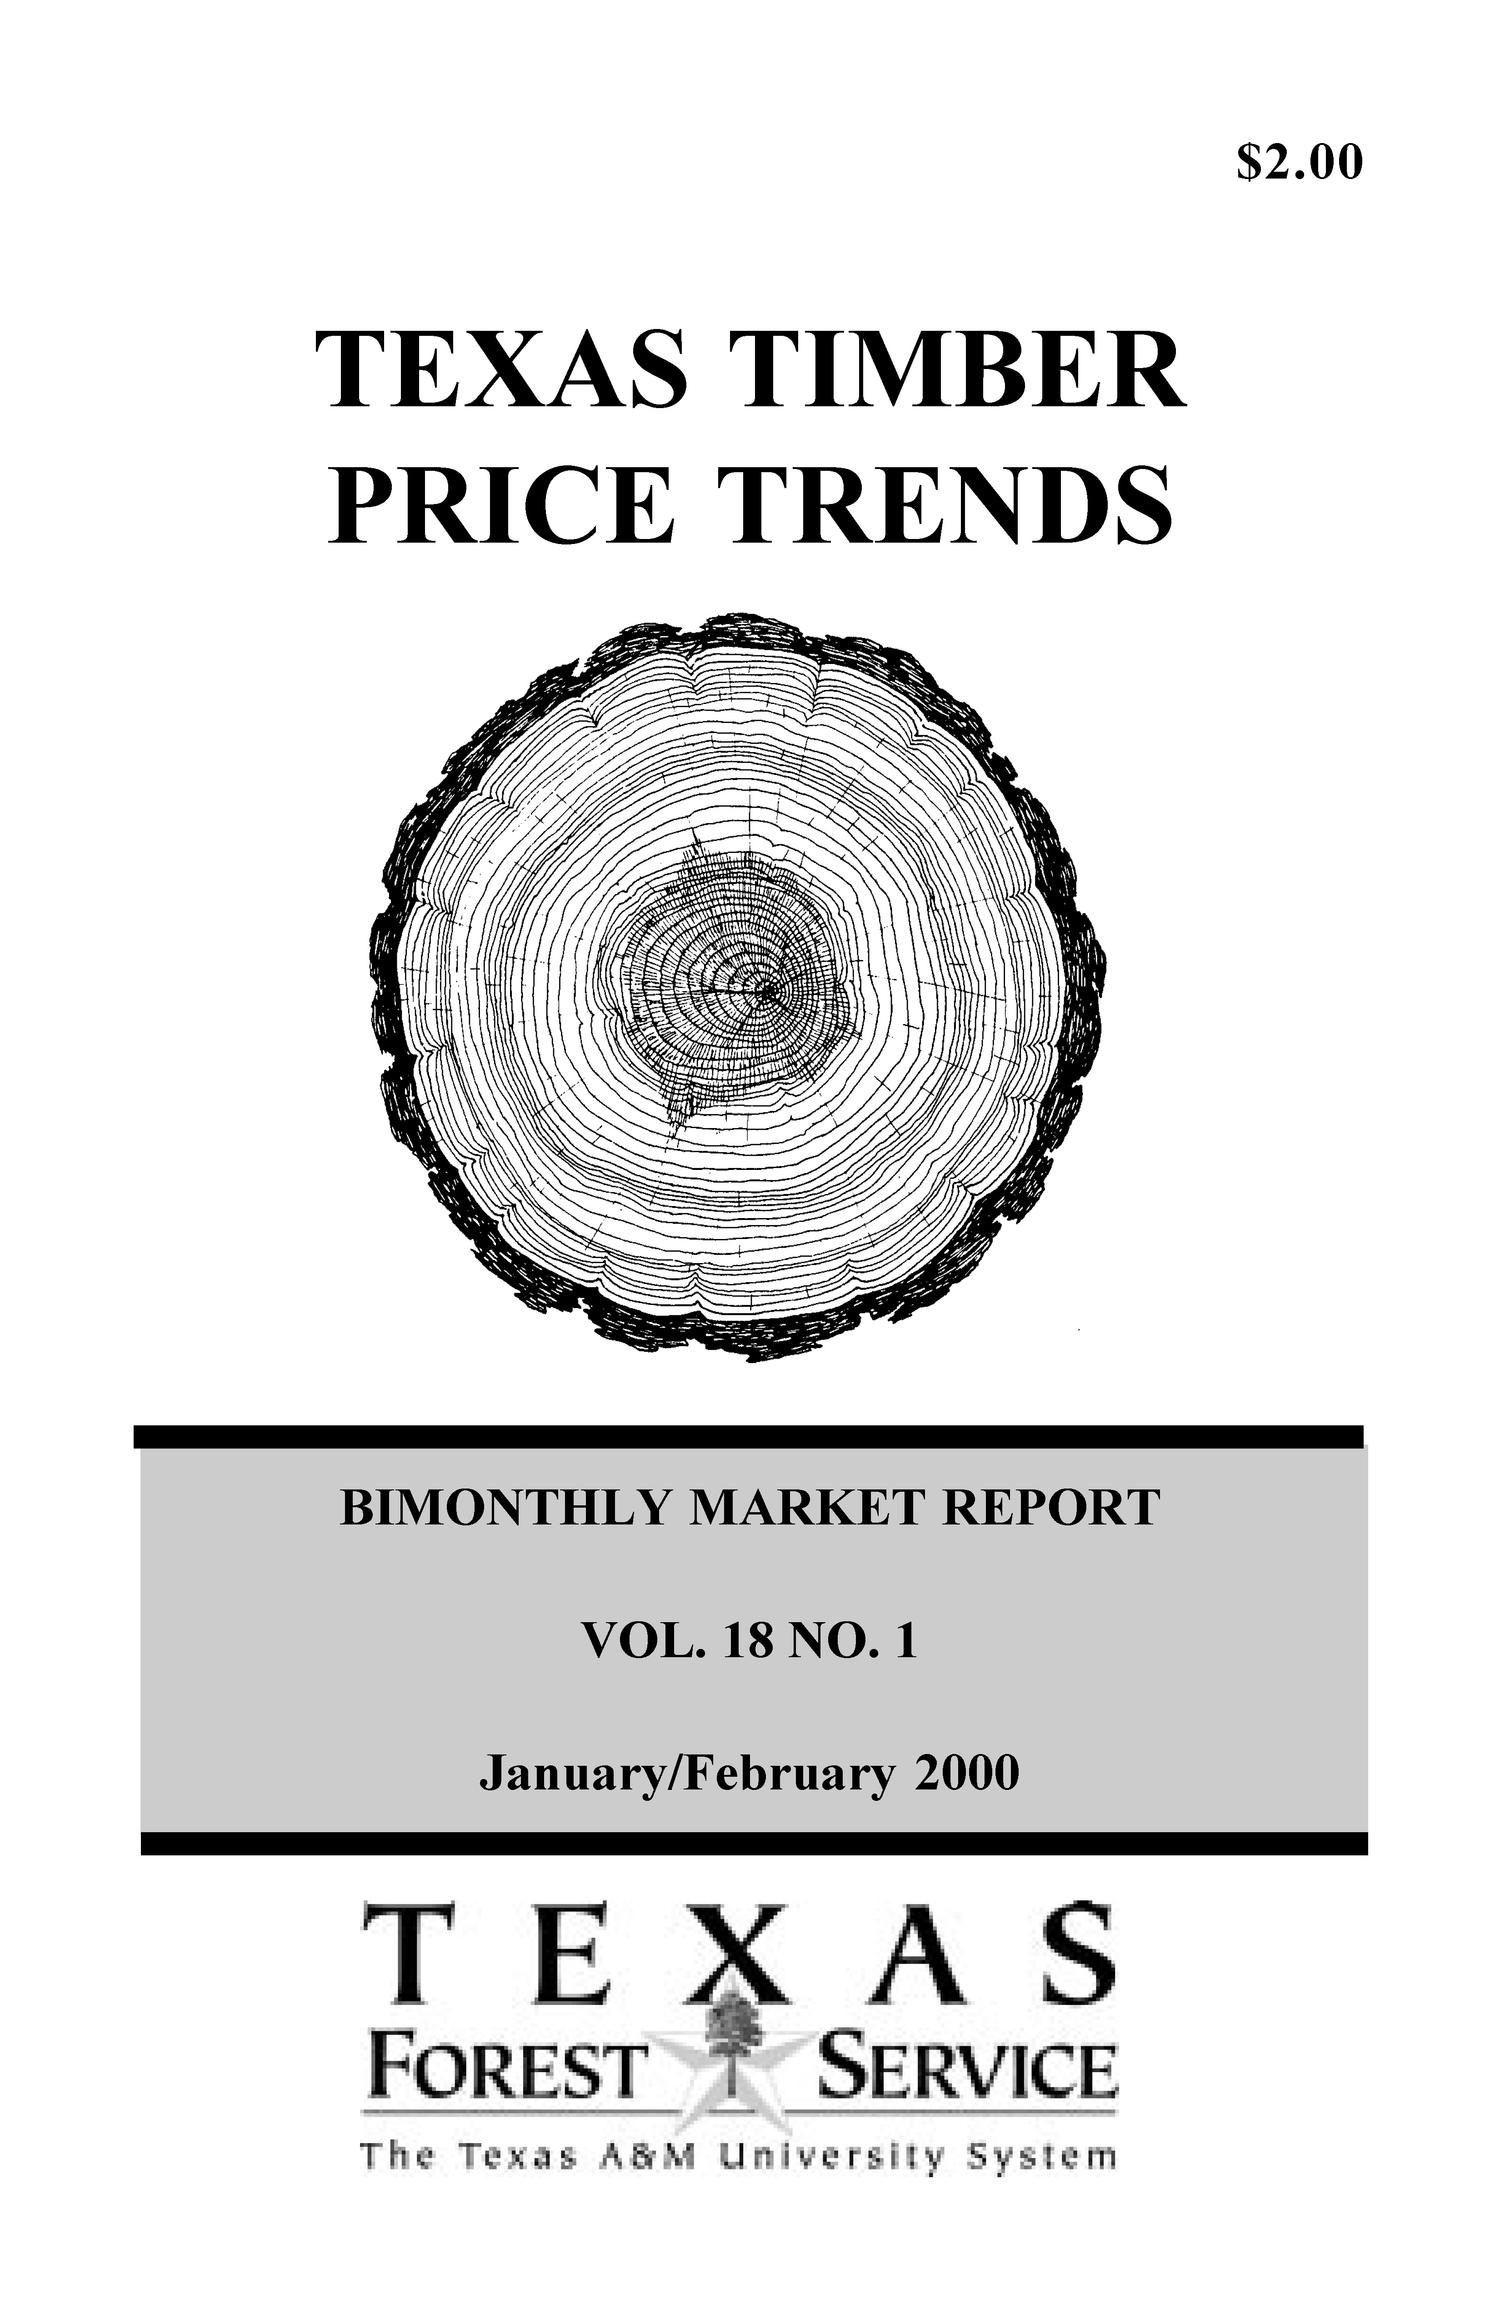 Texas Timber Price Trends, Volume 18, Number 1, January/February 2000
                                                
                                                    Front Cover
                                                